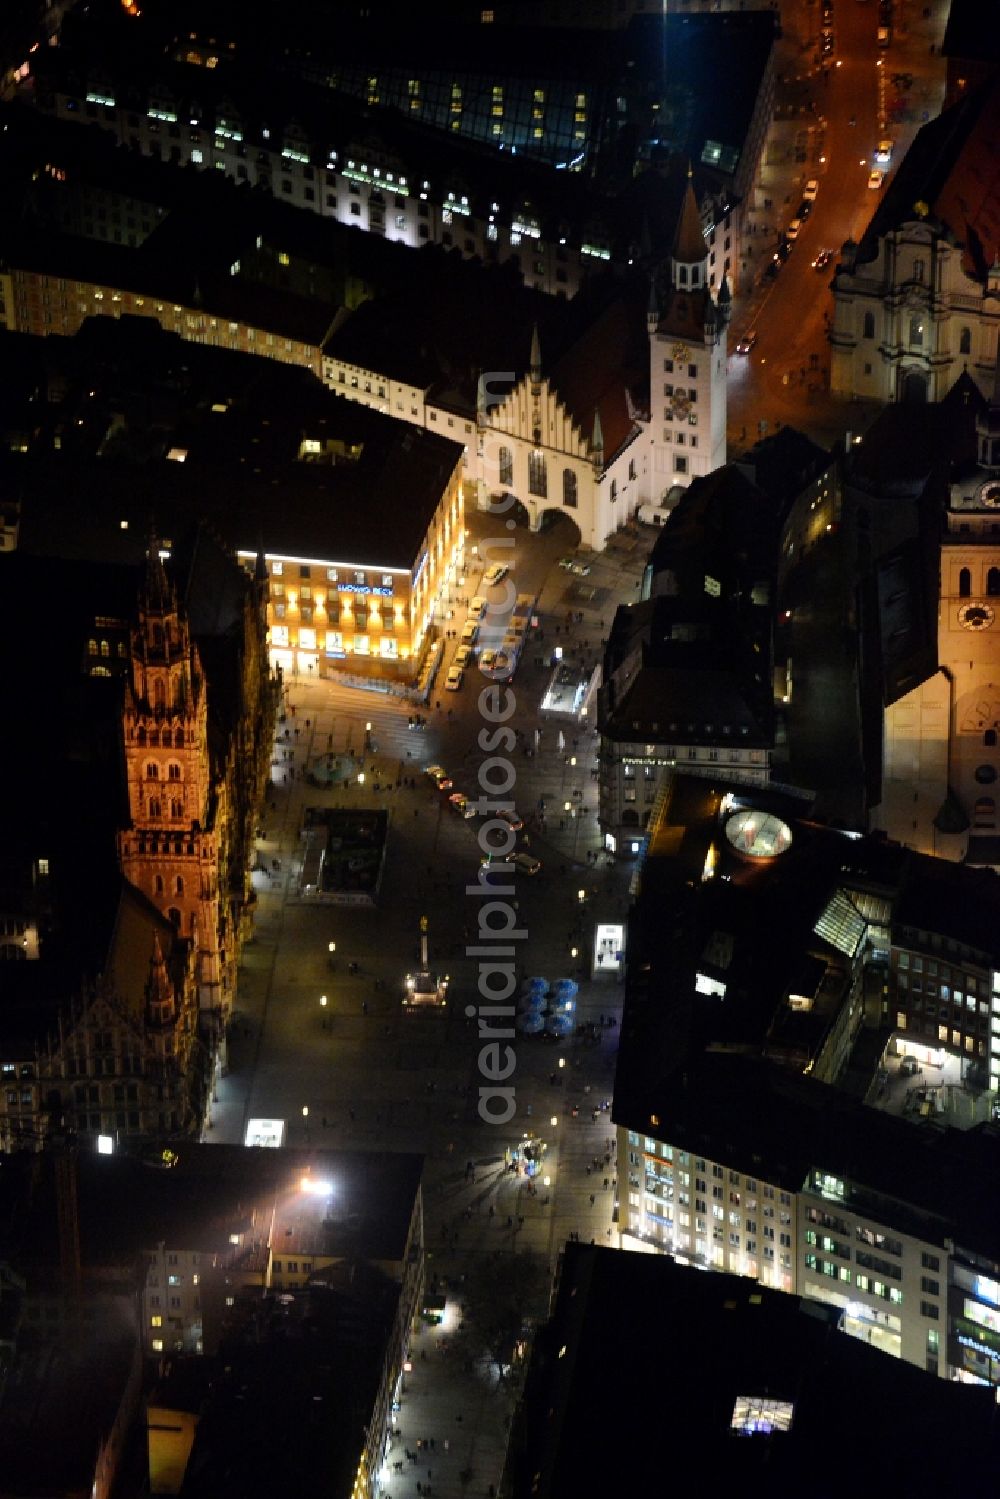 München at night from above - City view of the Old Town at the Frauenkirche at the New Town Hall in the center of Munich in Bavaria